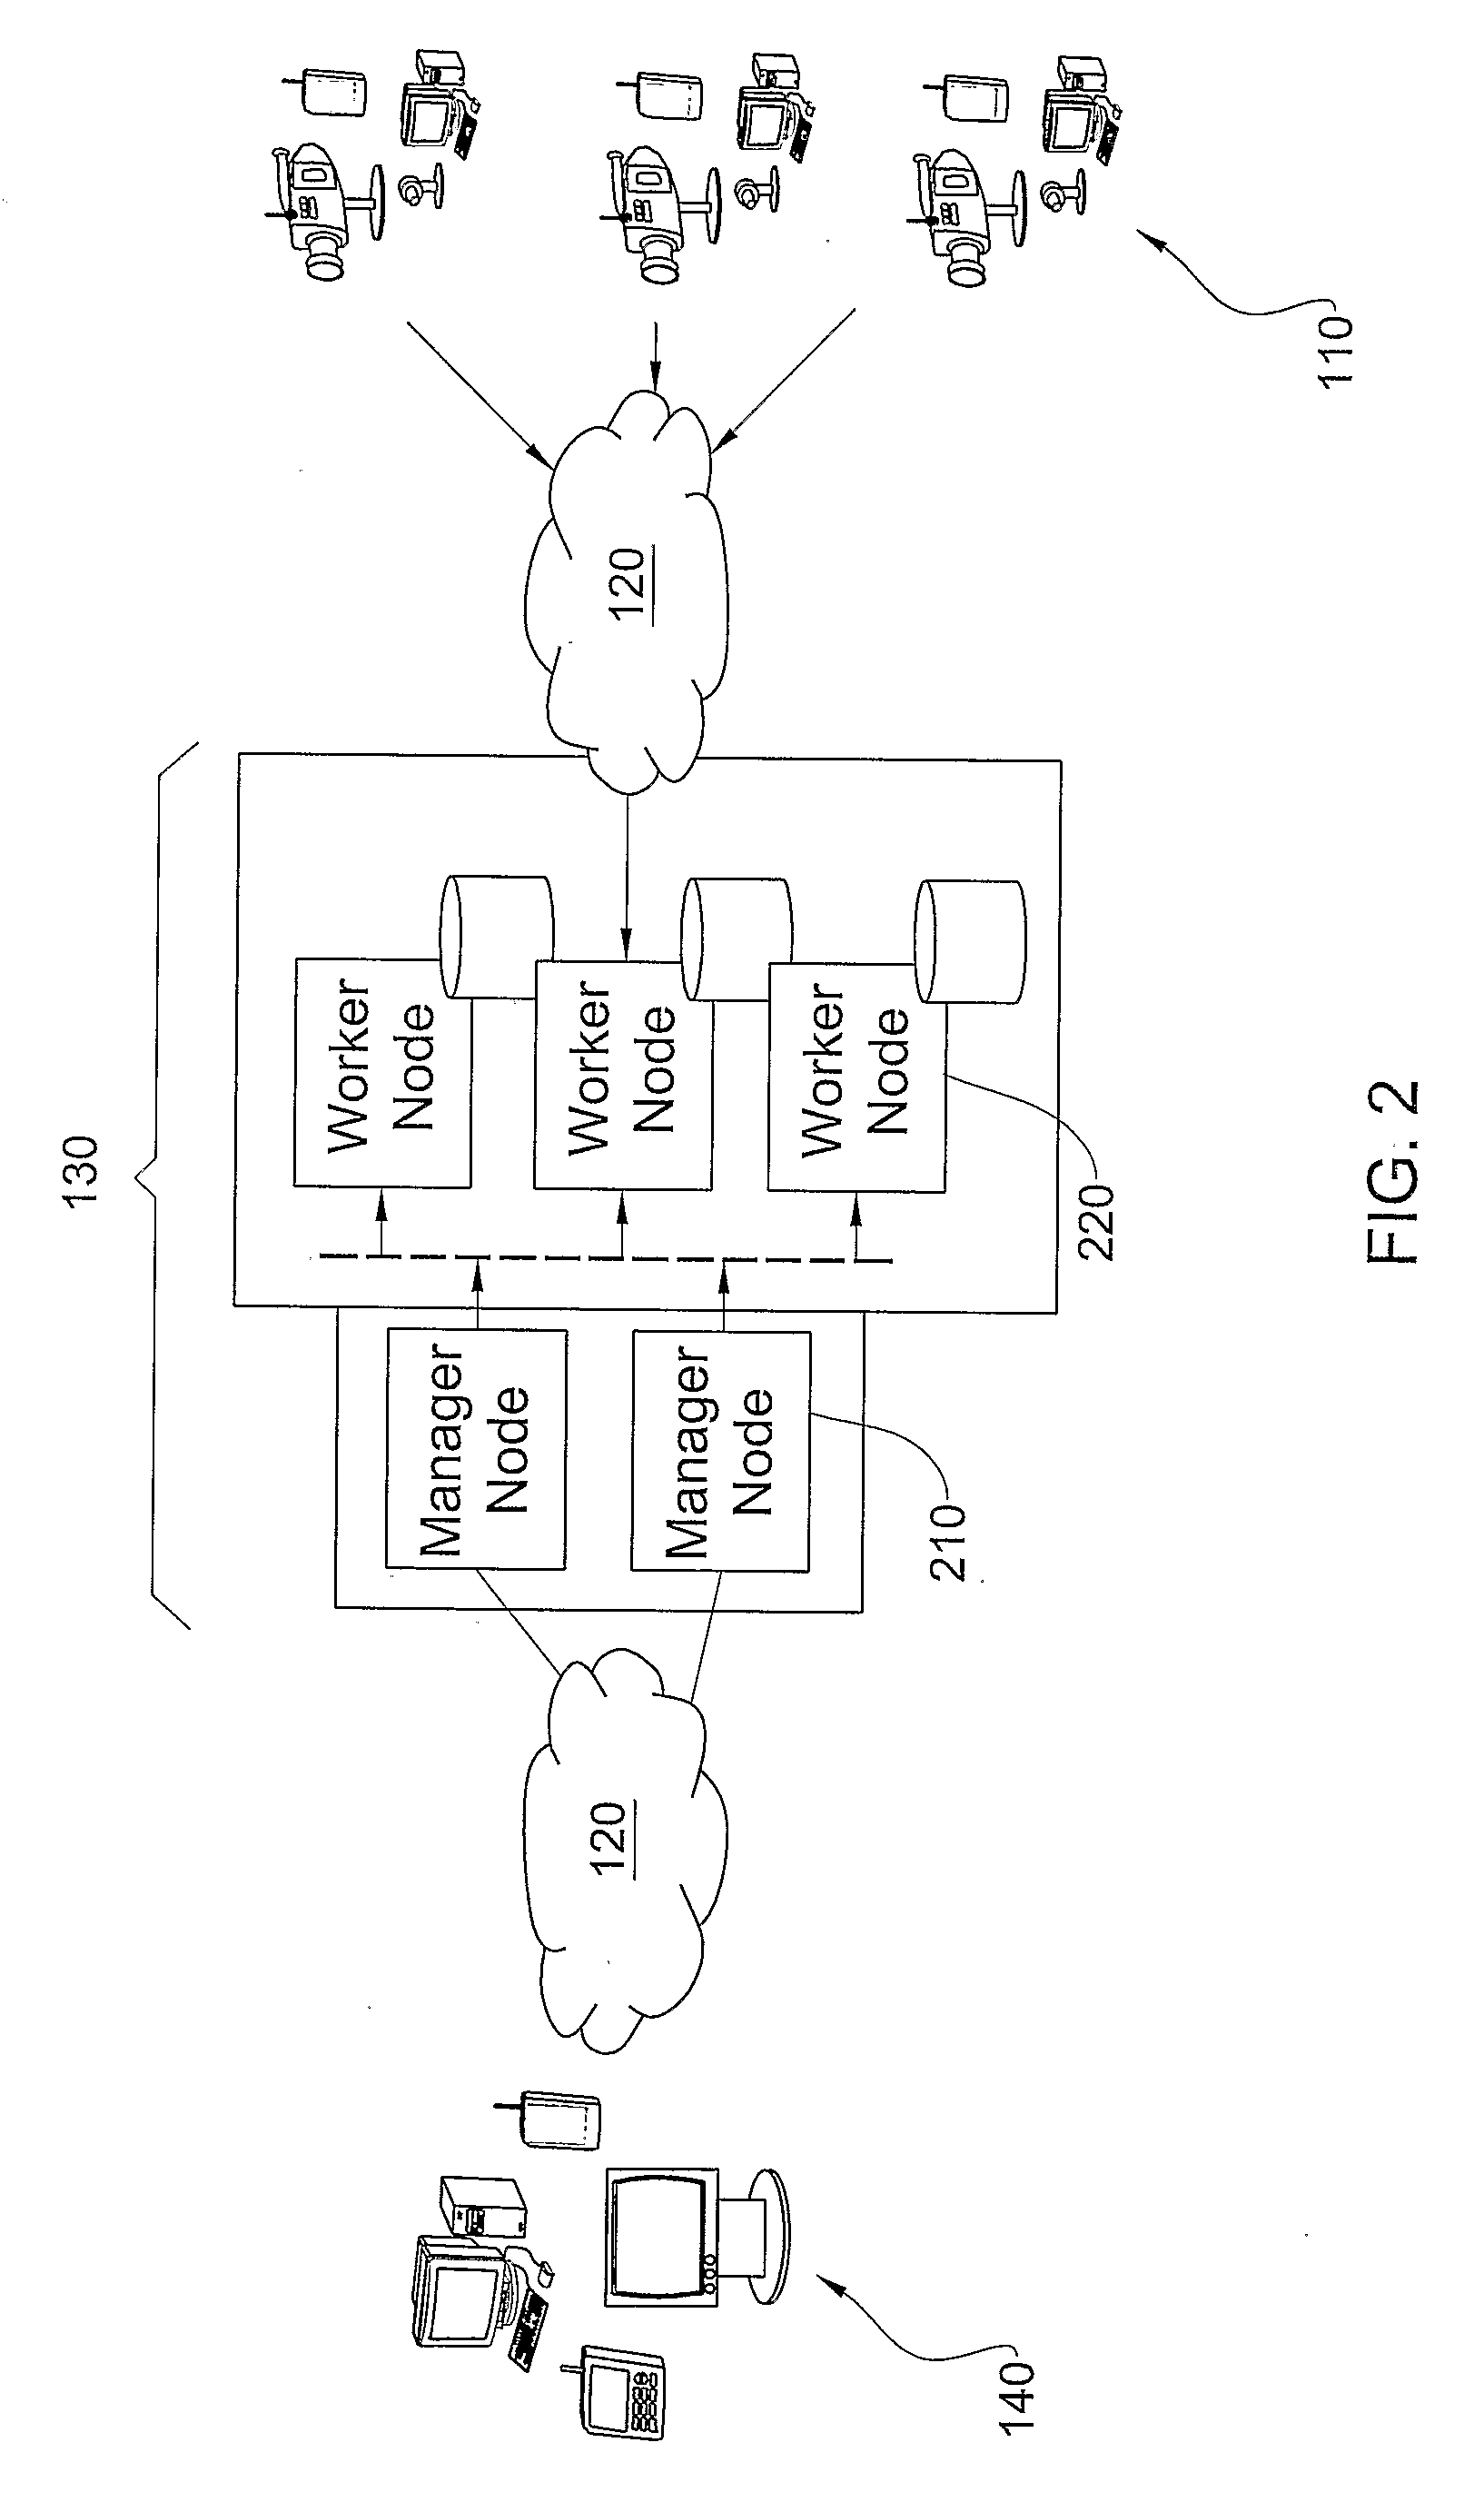 Method for a clustered centralized streaming system